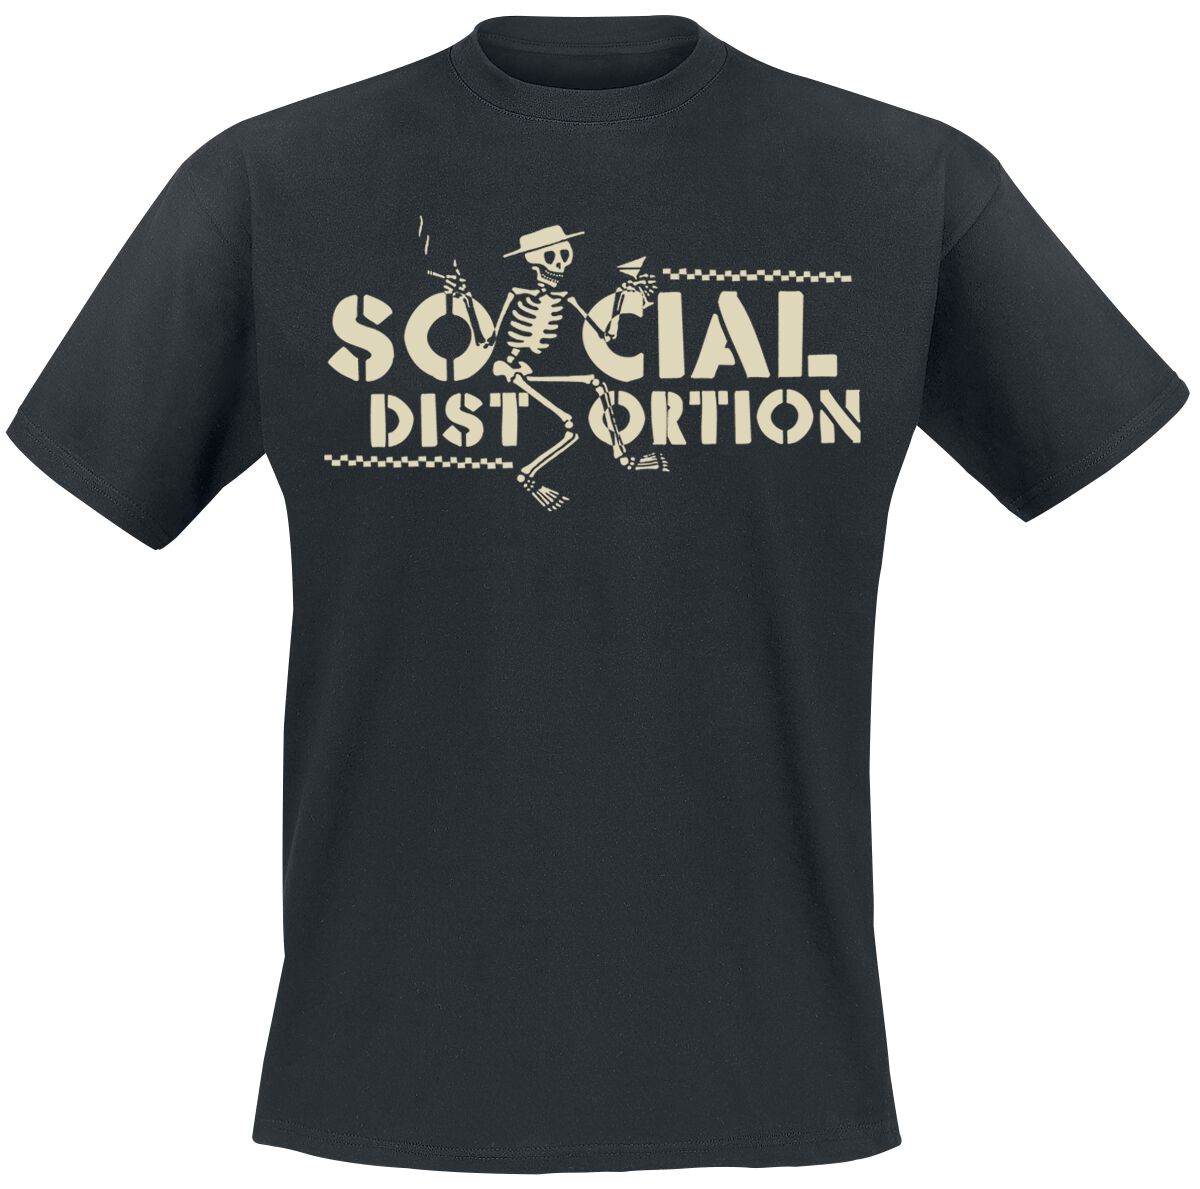 Image of T-Shirt di Social Distortion - Checkered Skellie - S a 3XL - Uomo - nero